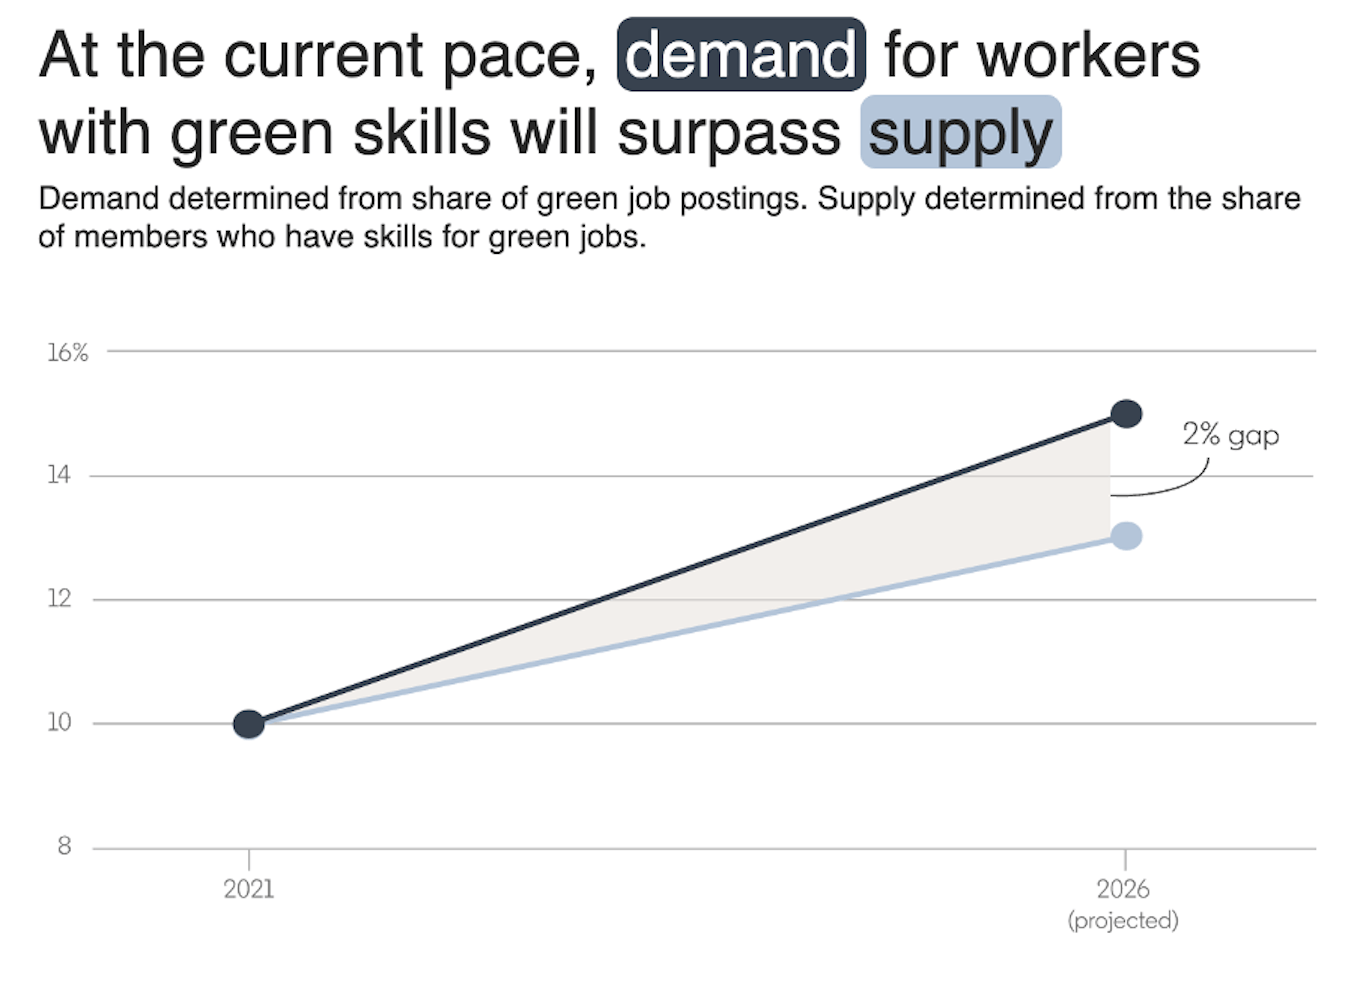 projected gap between demand and supply for green skills jobs